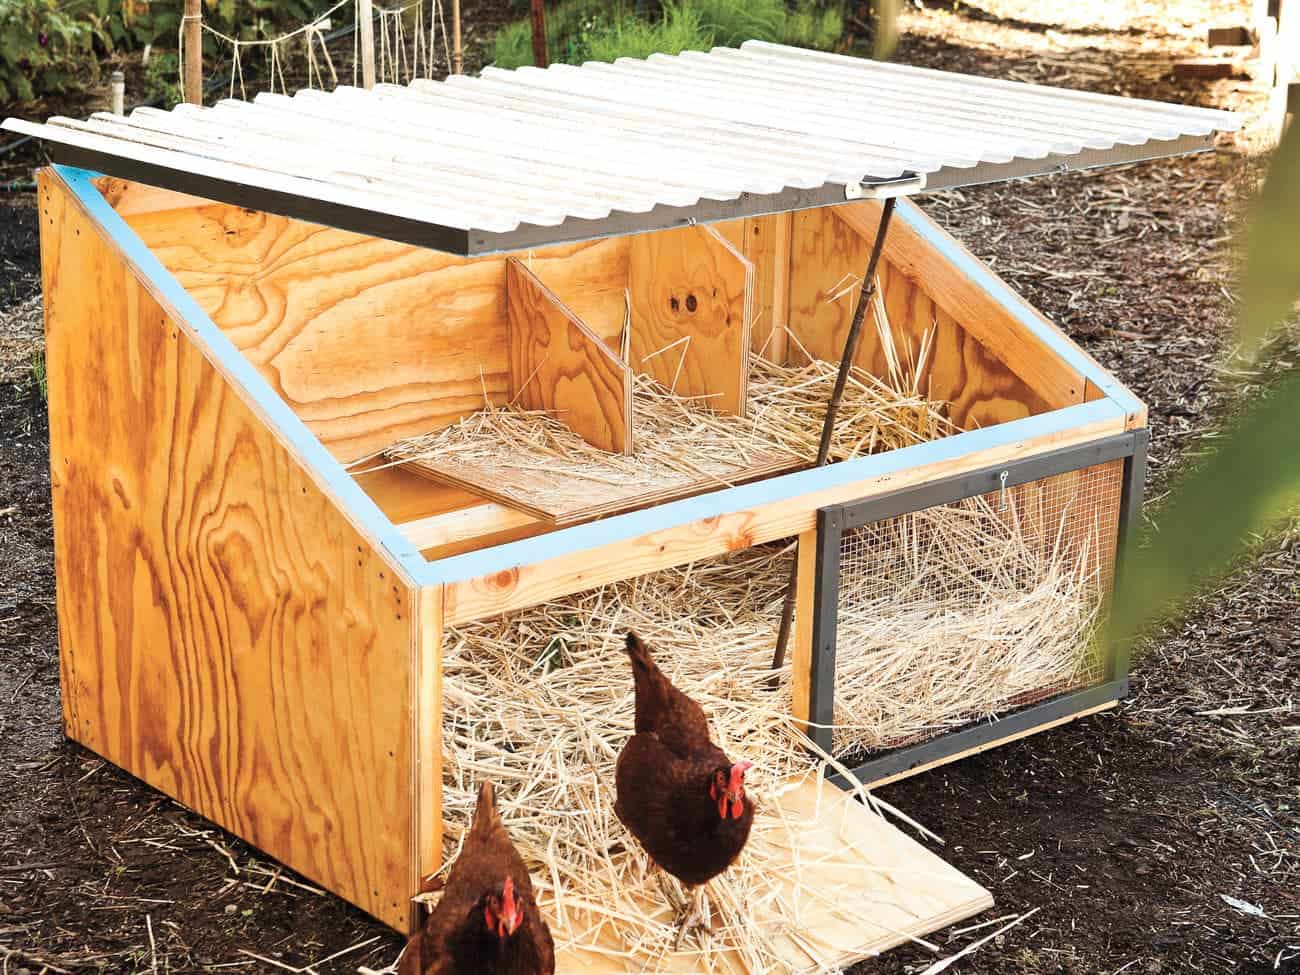 DIY Small and simple chicken coop